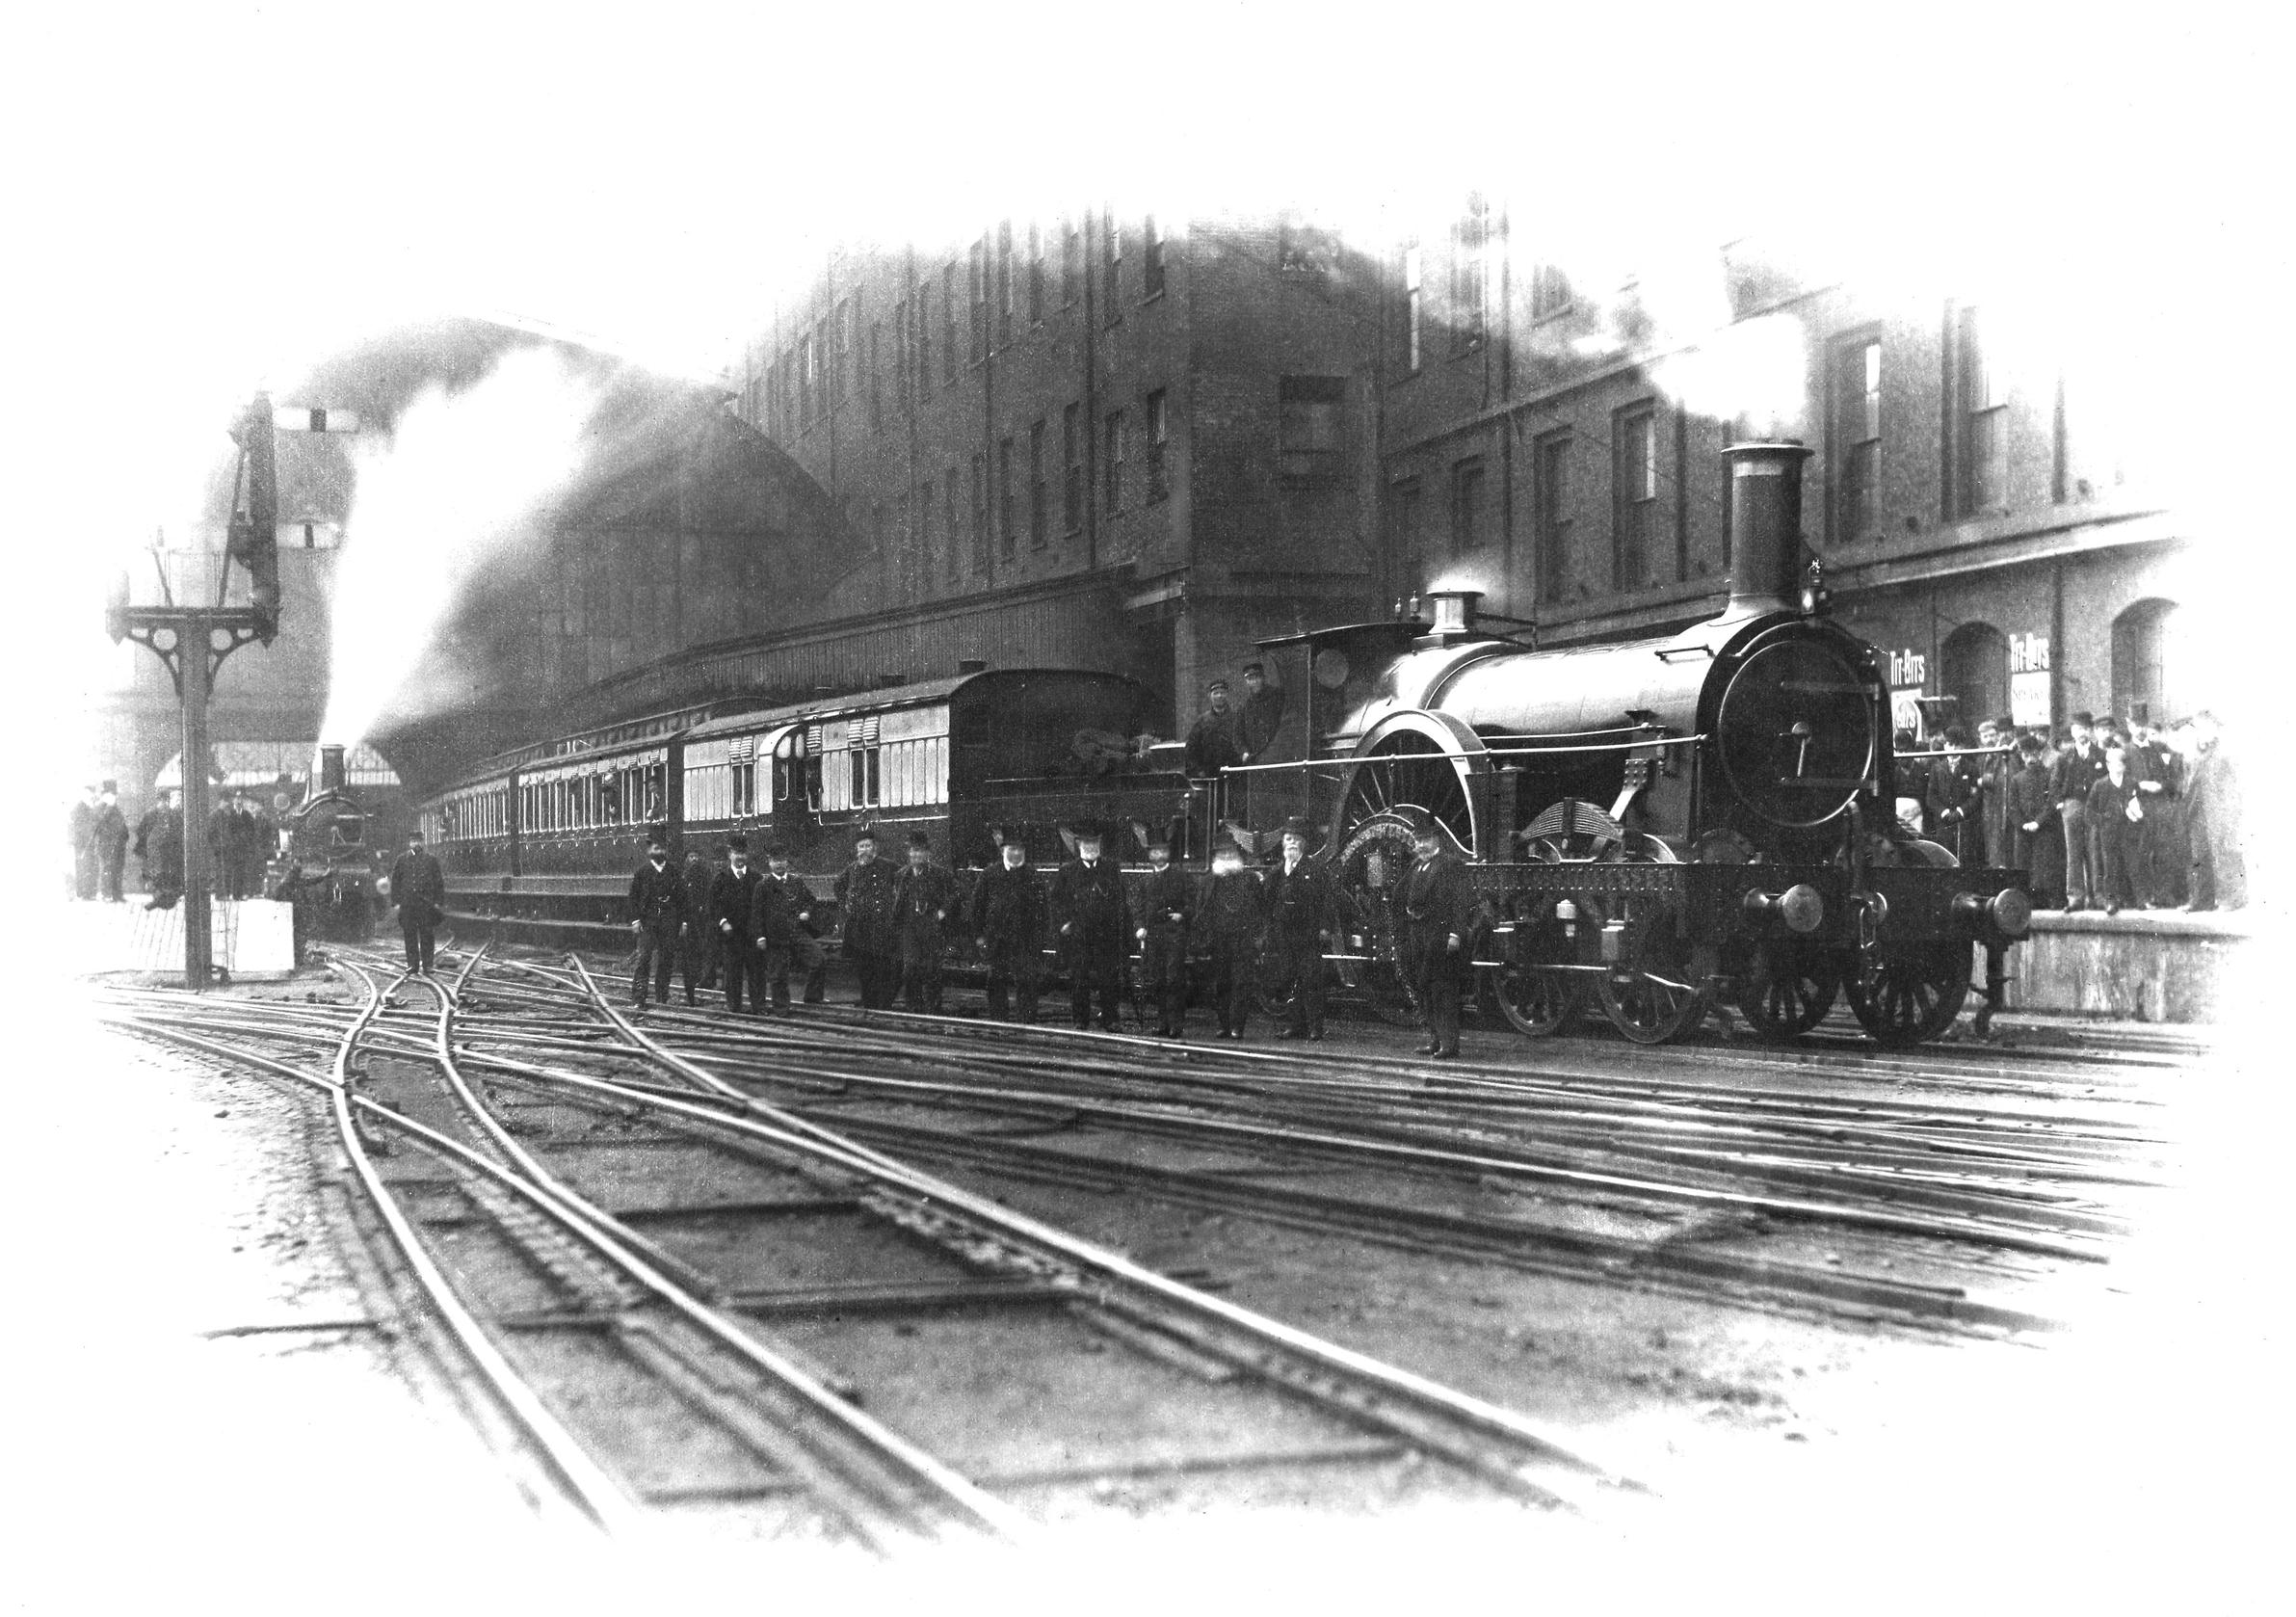 Railway staff line up for a portrait at Paddington station in the 1890s